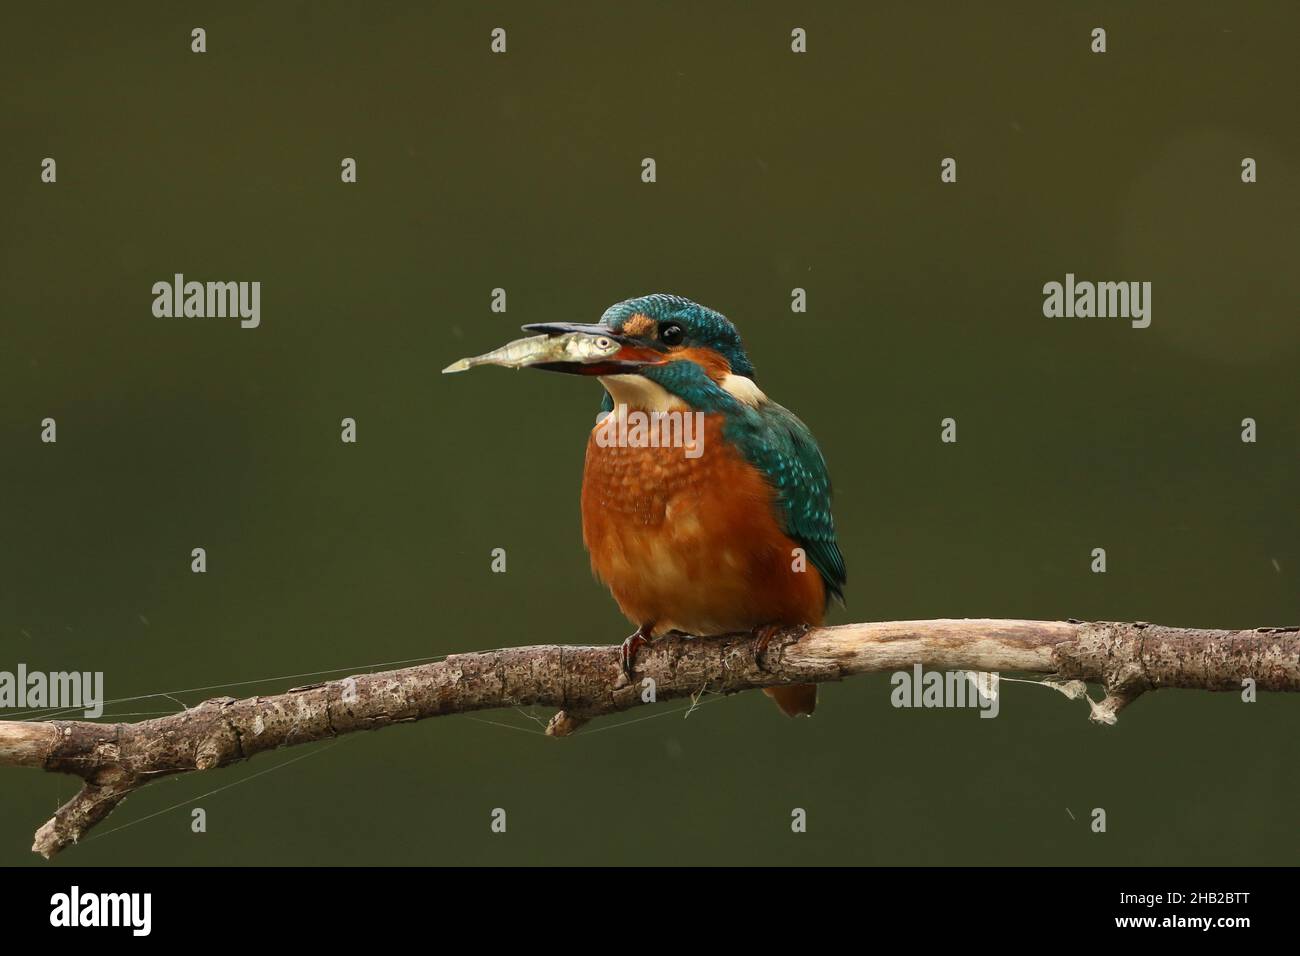 Kingfishers require a good supply of fish and other aquatic prey to survive, diving from branches, they return to stun the prey before consuming. Stock Photo